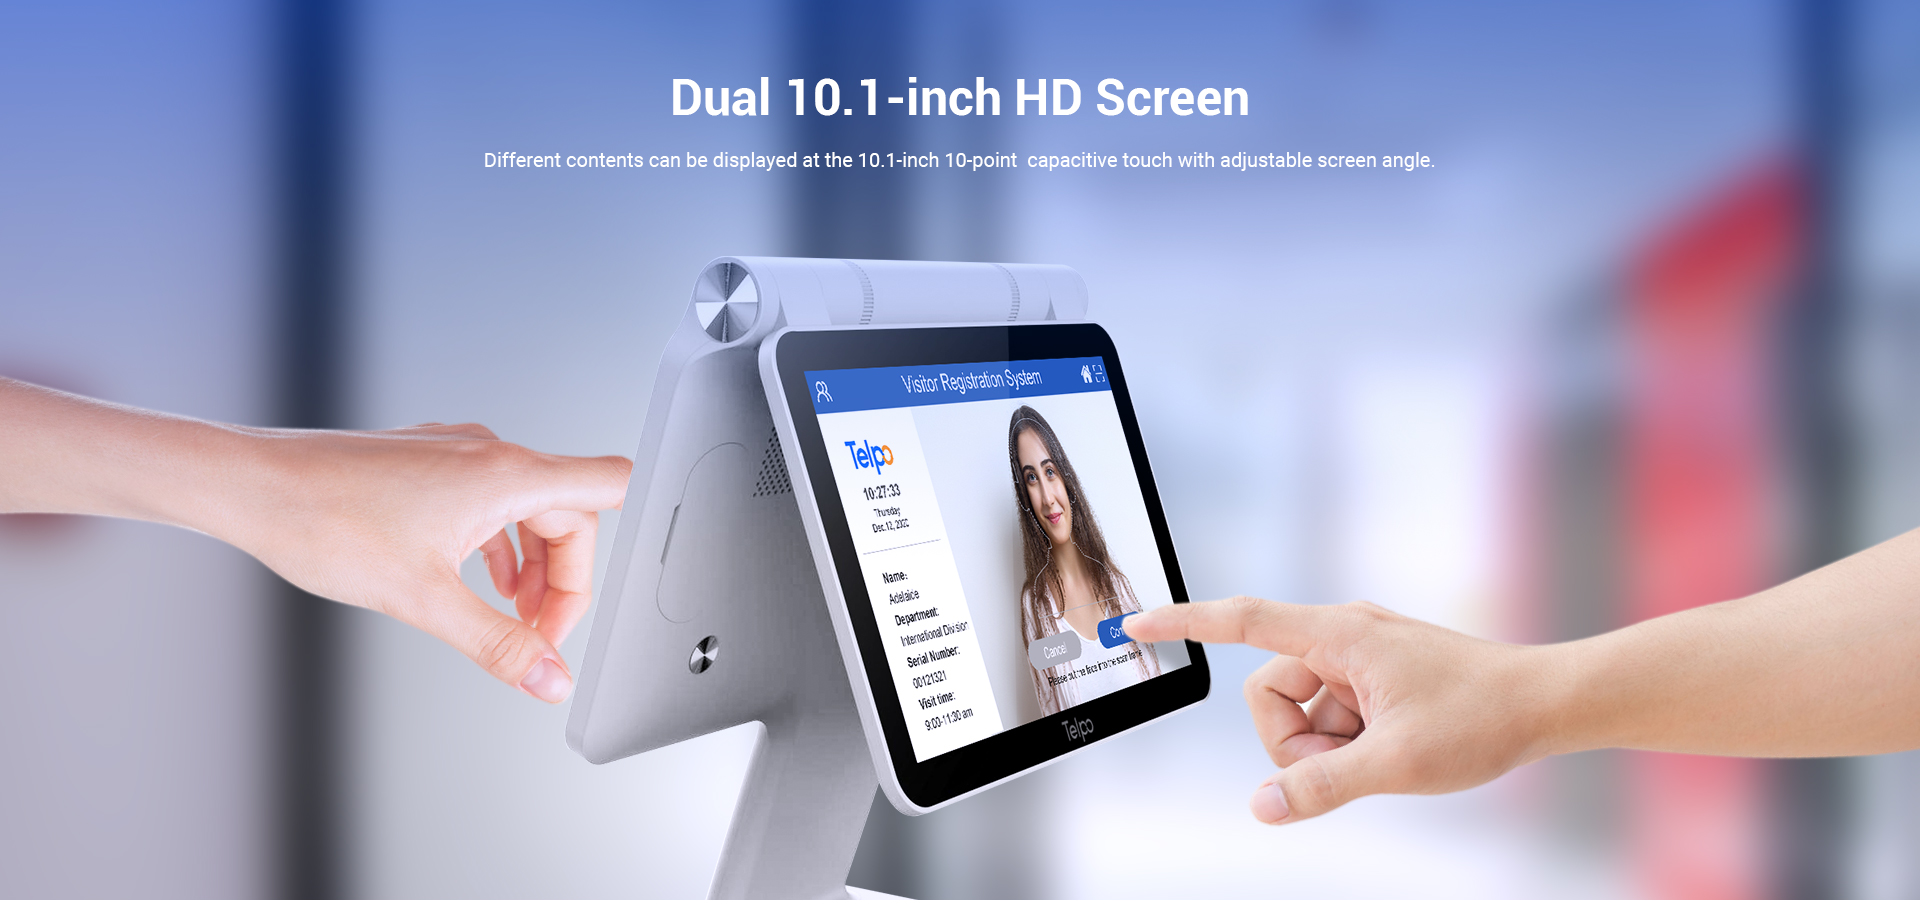 Telpo D2 10.1-inch 10-point capacitive touch with adjustable screen angle